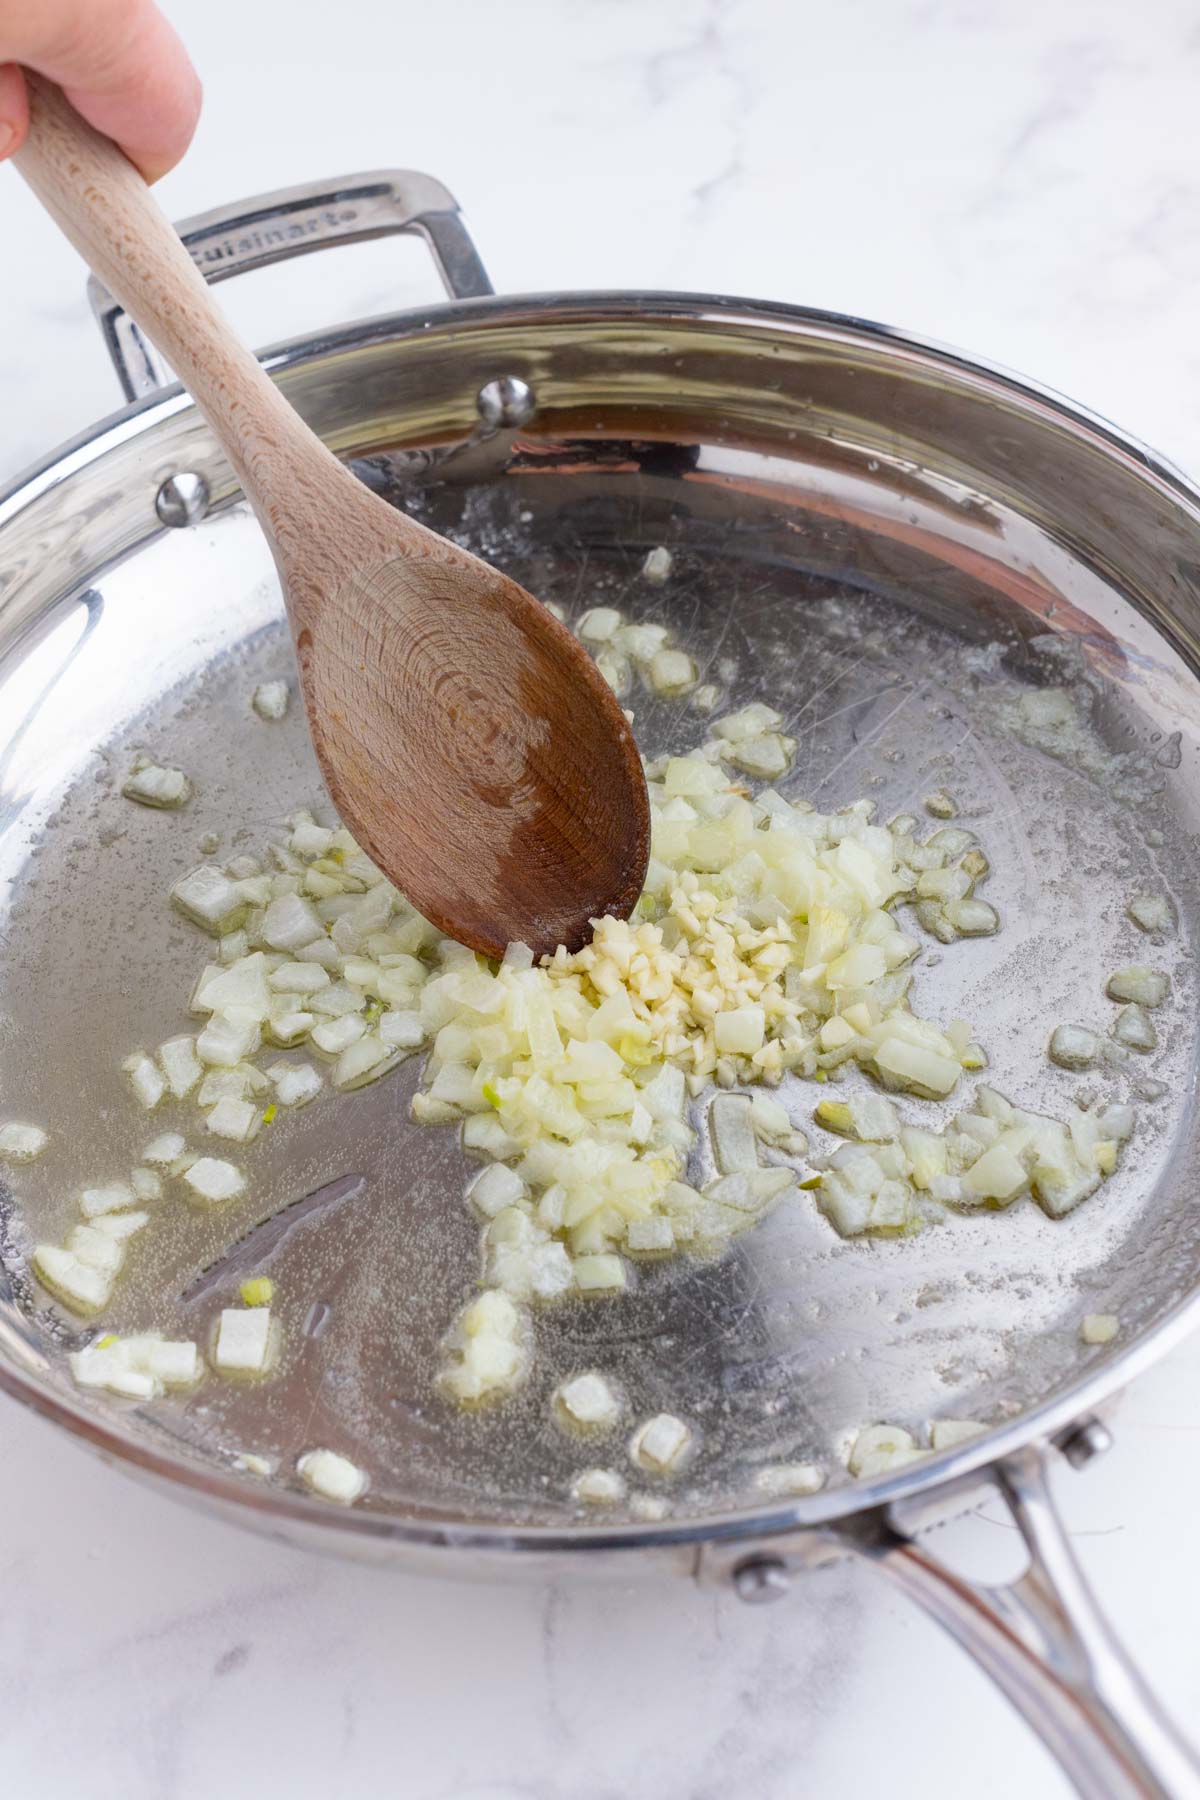 Onions and garlic are cooked in a skillet.